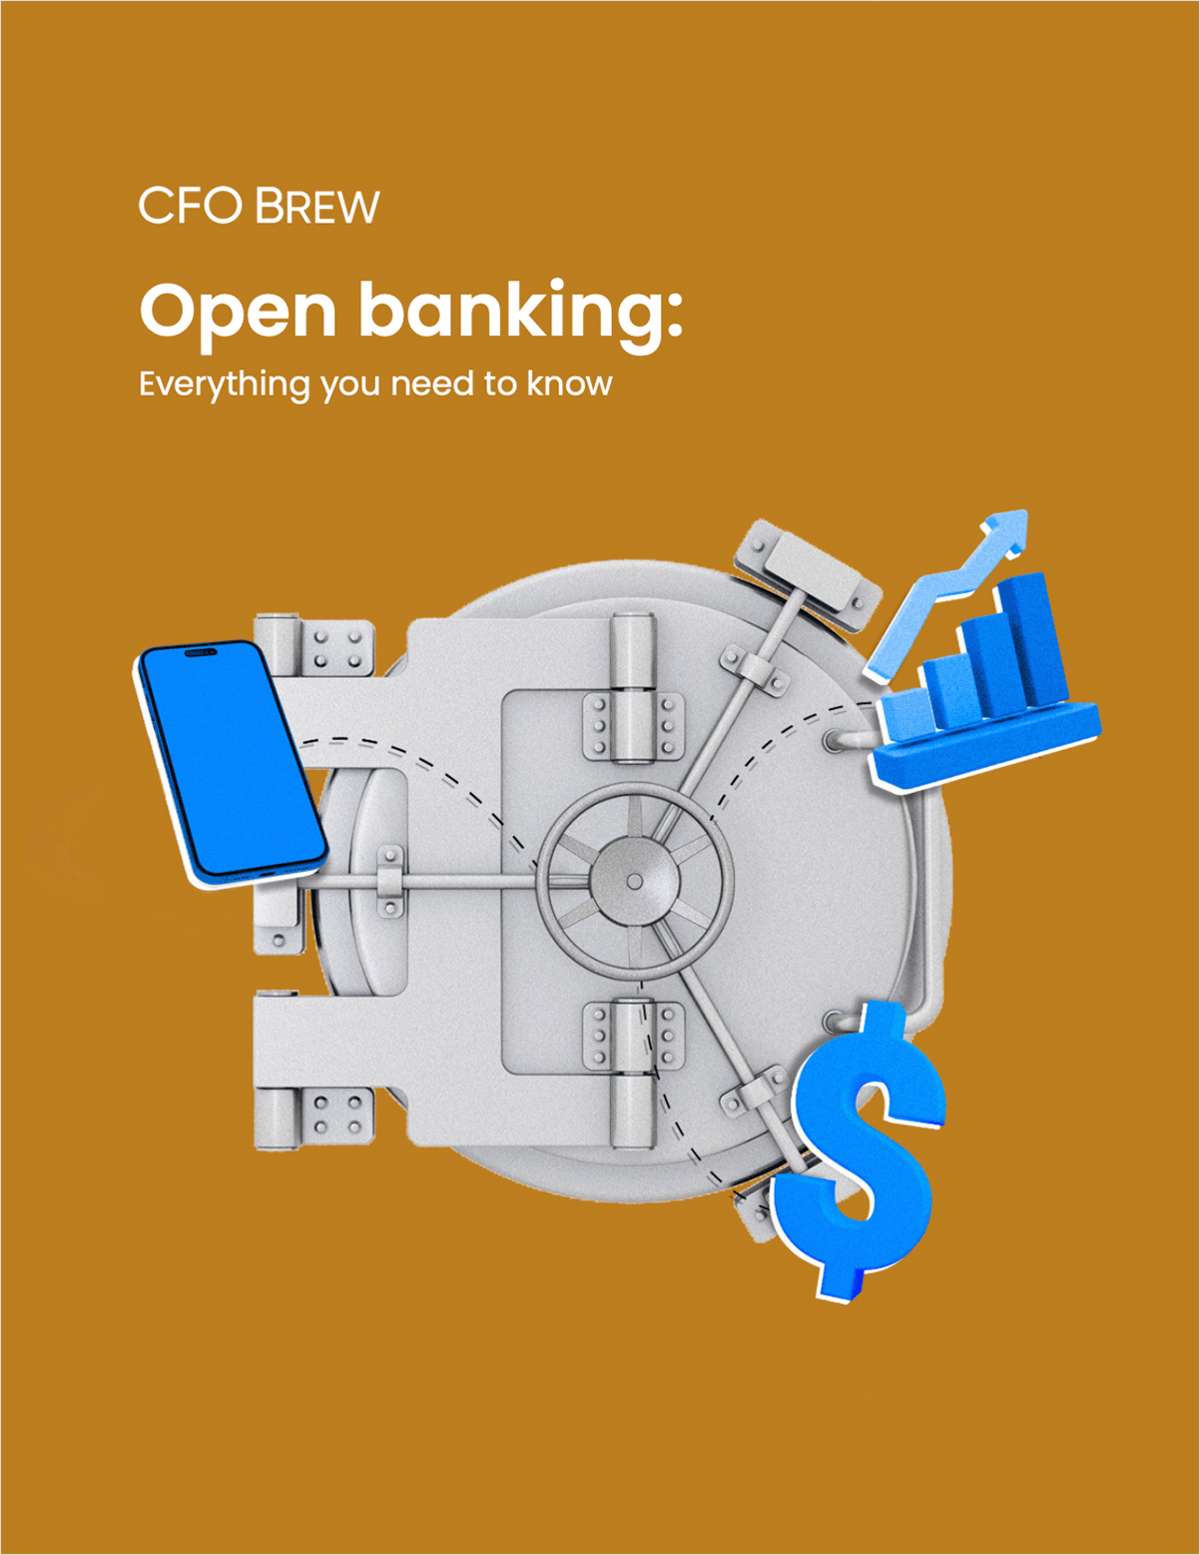 Everything You Need to Know About Open Banking